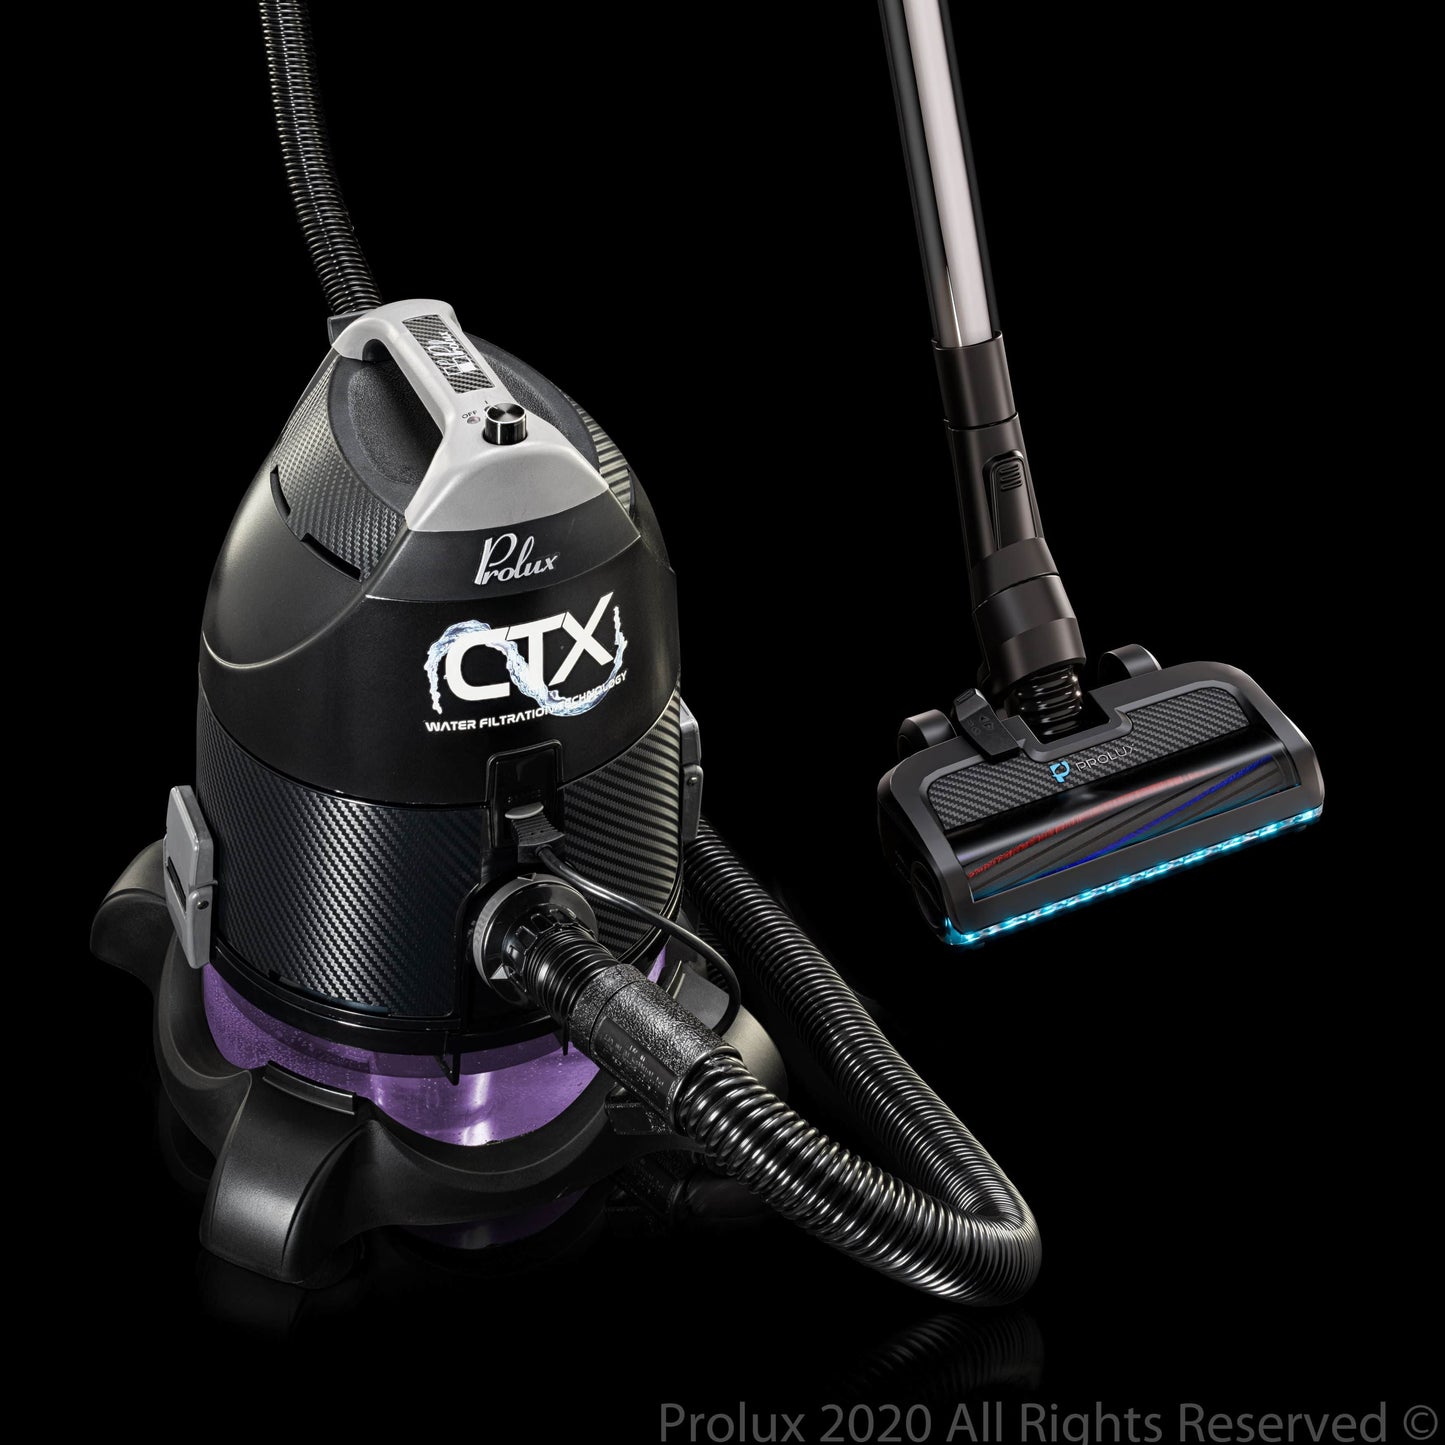 Prolux CTX PET Water Filtration Bagless Canister Vacuum Cleaner